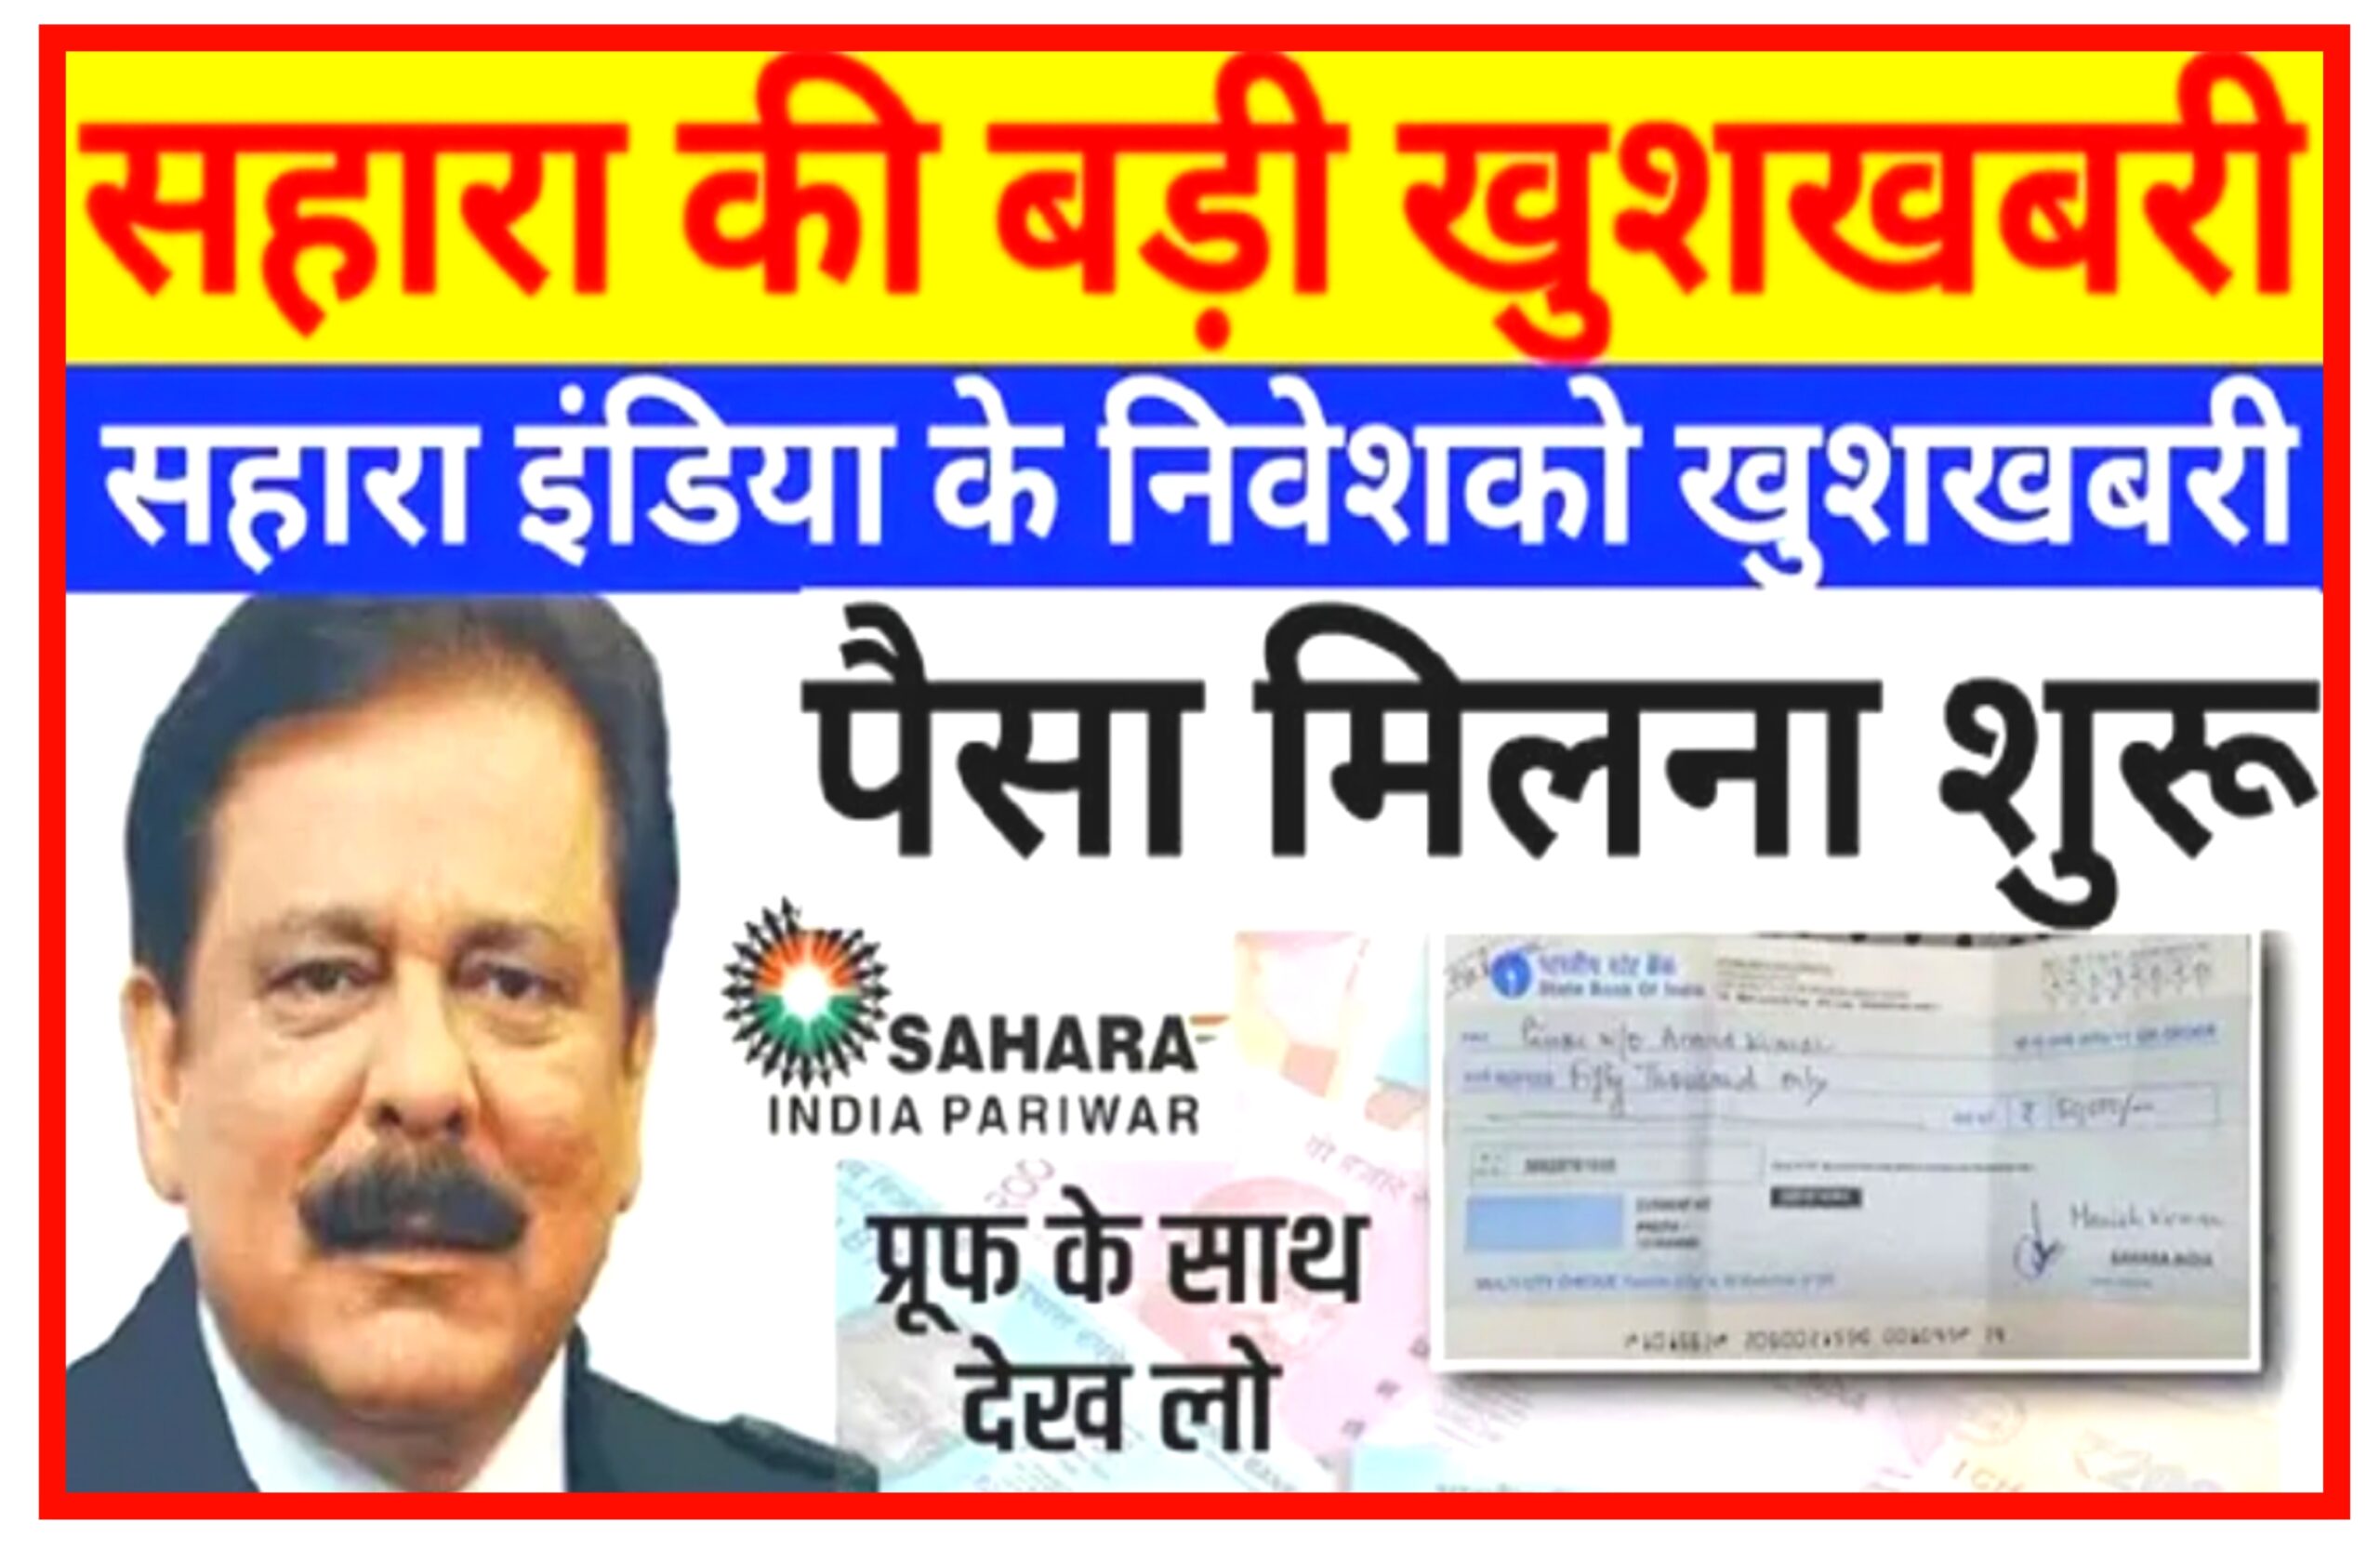 sahara india news || sahara india news today 2022 || sahara india ka paisa kab milega || sahara india pariwar || sahara india refund || sahara india latest news || sahara india payment